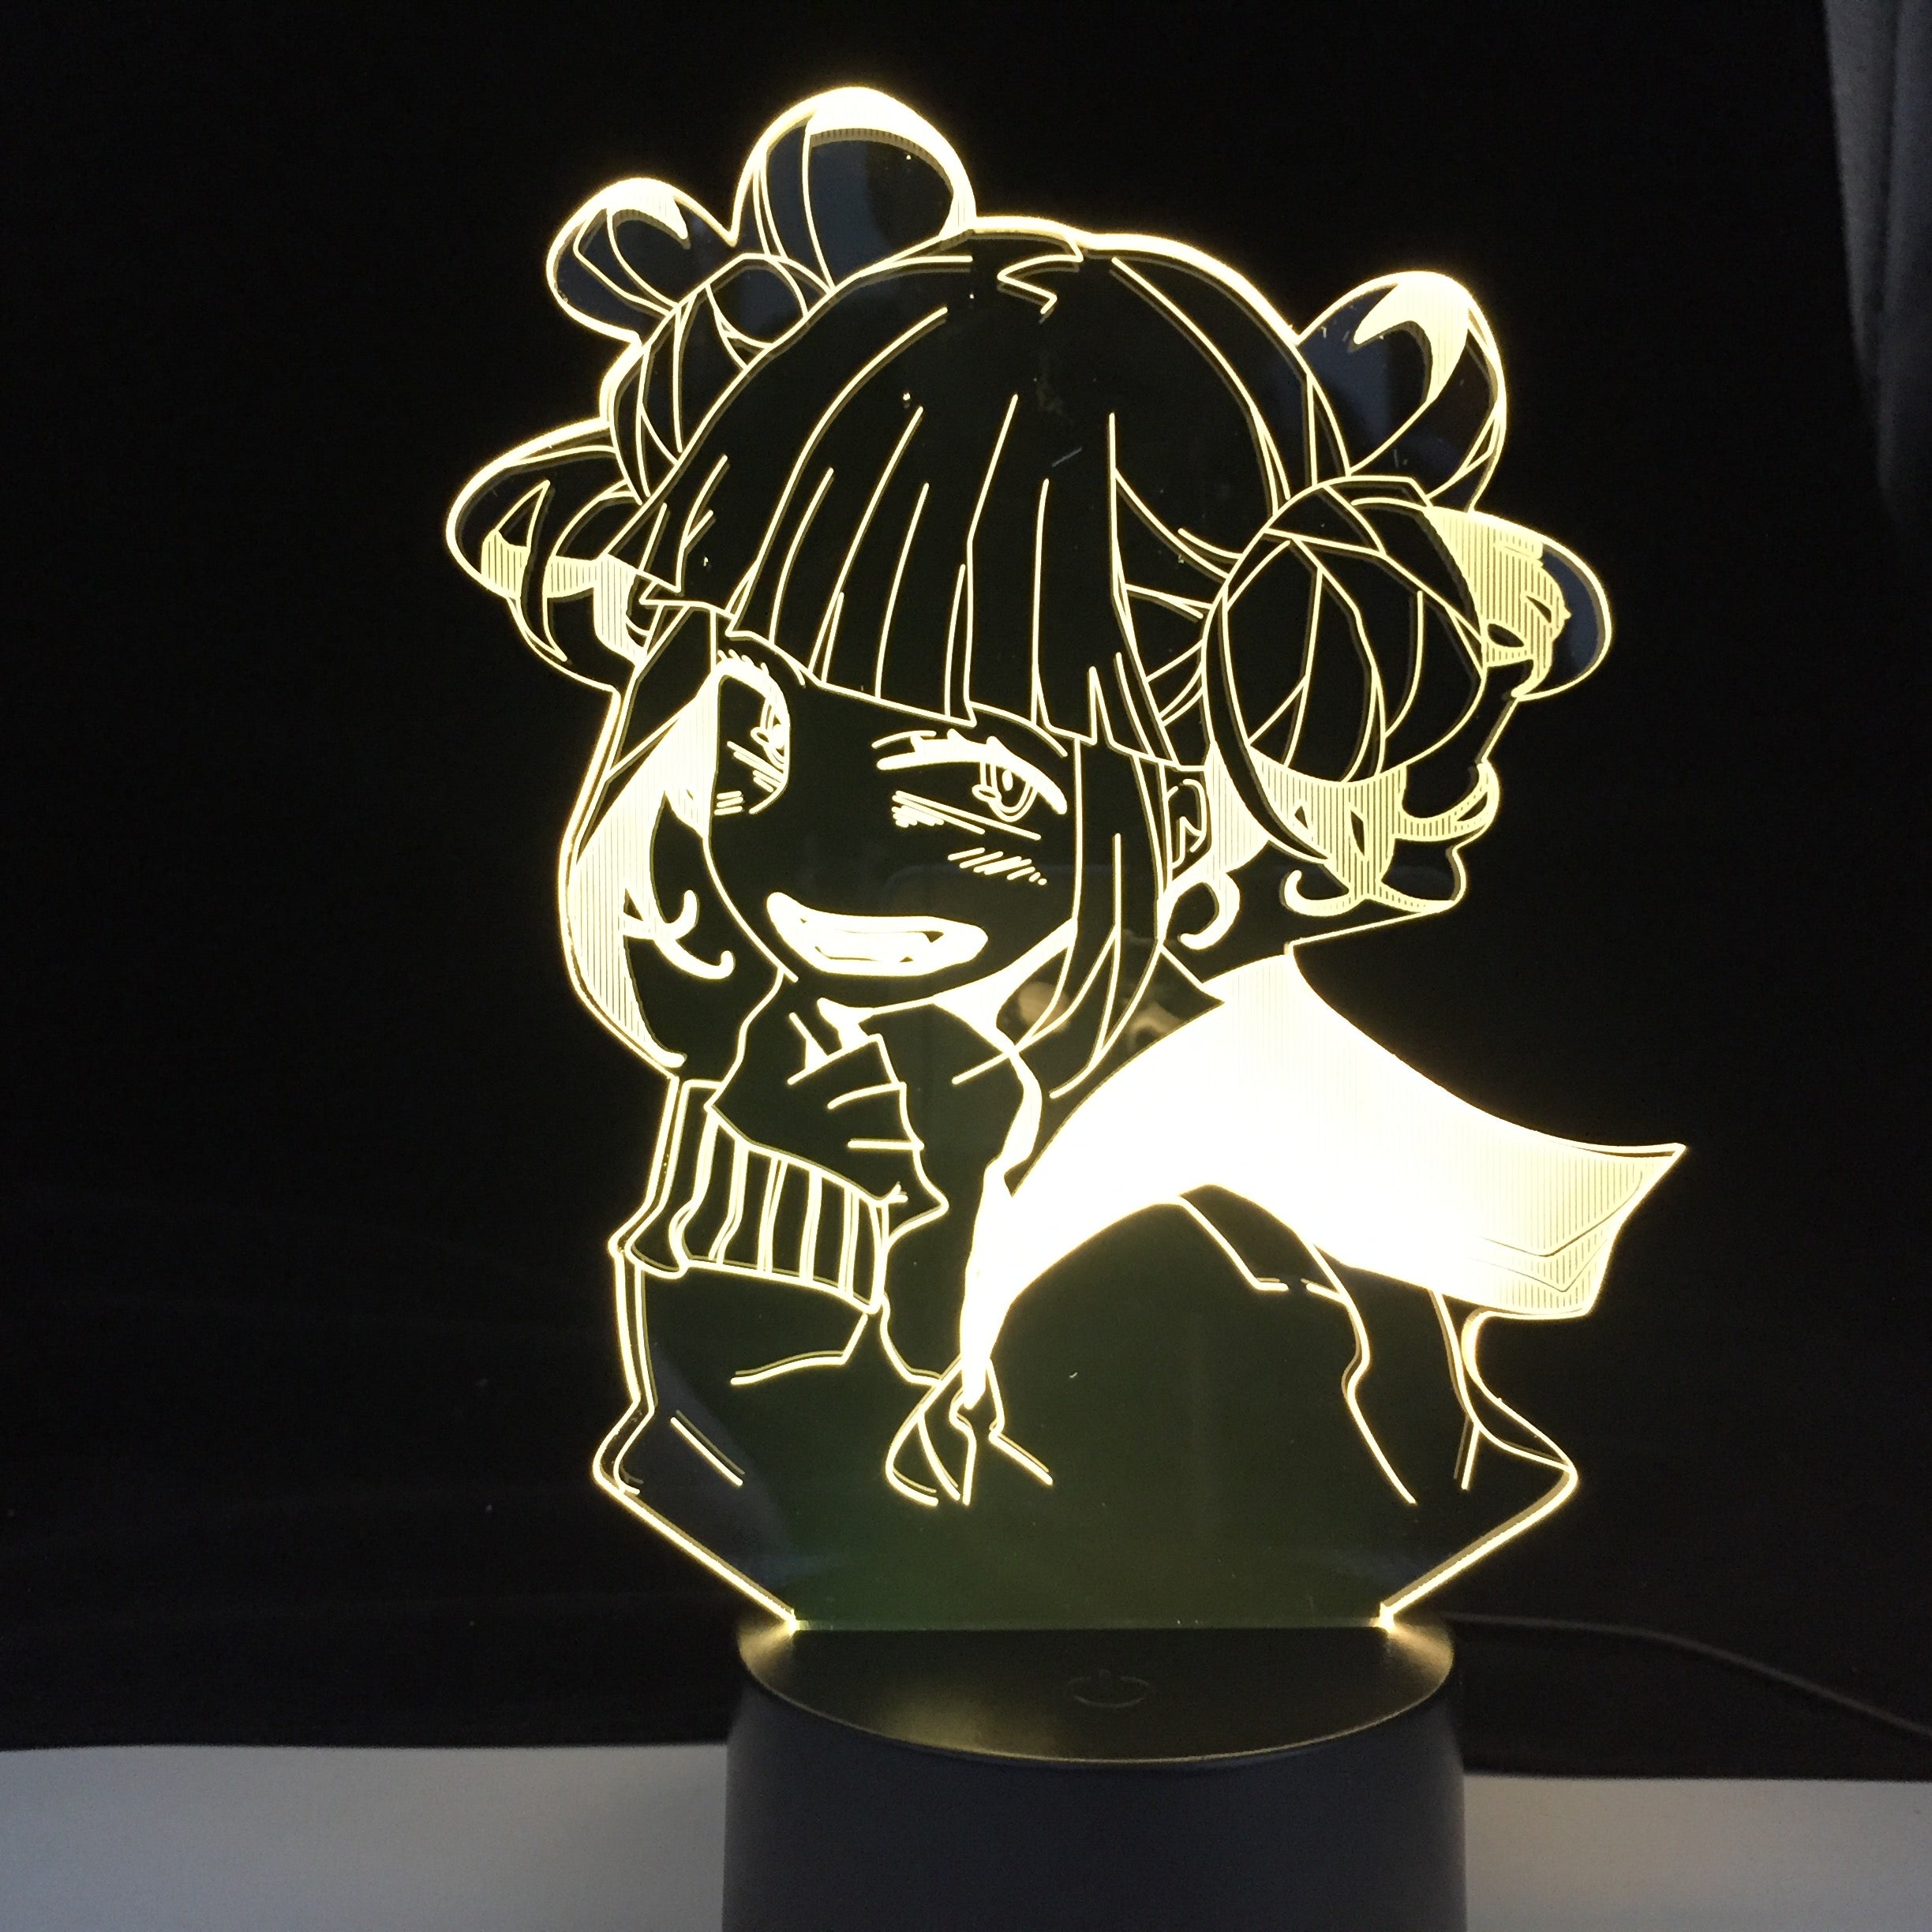 Himiko Toga Newest MY HERO ACADEMIA 3D ANIME LAMP Boku No Cross My Body Night Lights for Bedroom Decoration Night Lamp Party Use